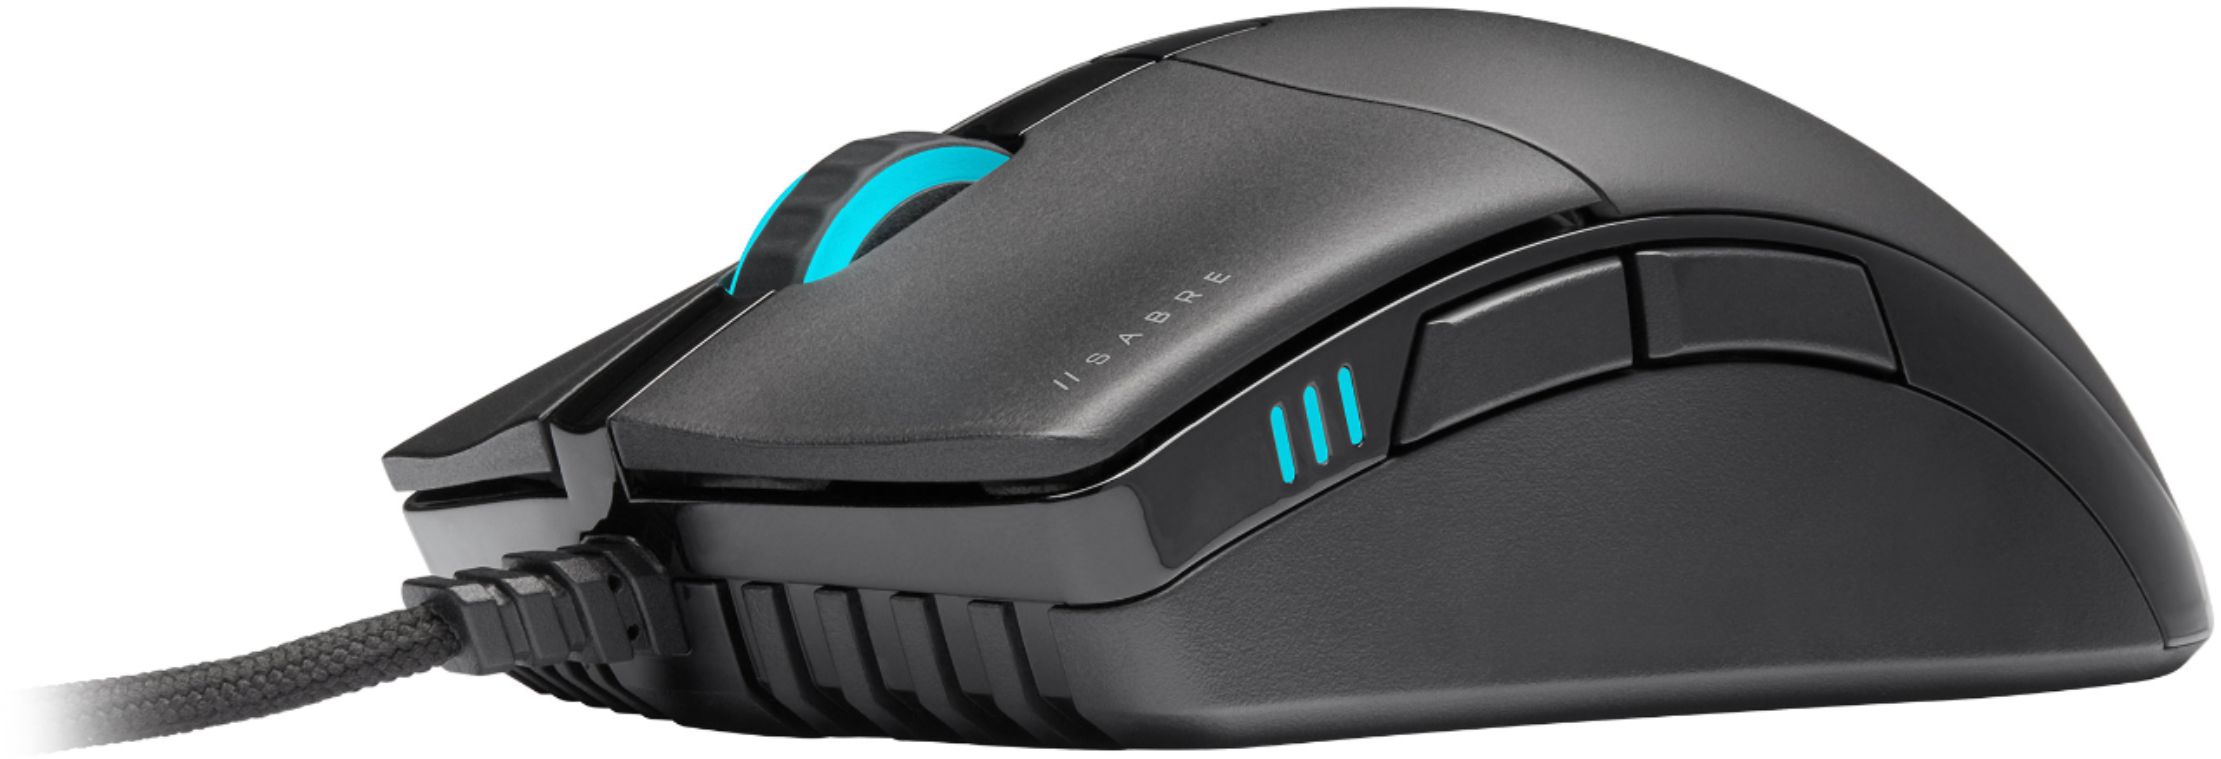 CORSAIR - CHAMPION SERIES SABRE RGB PRO Lightweight Wired Optical Gaming  Mouse with 69g Ultra-lightweight design - Black